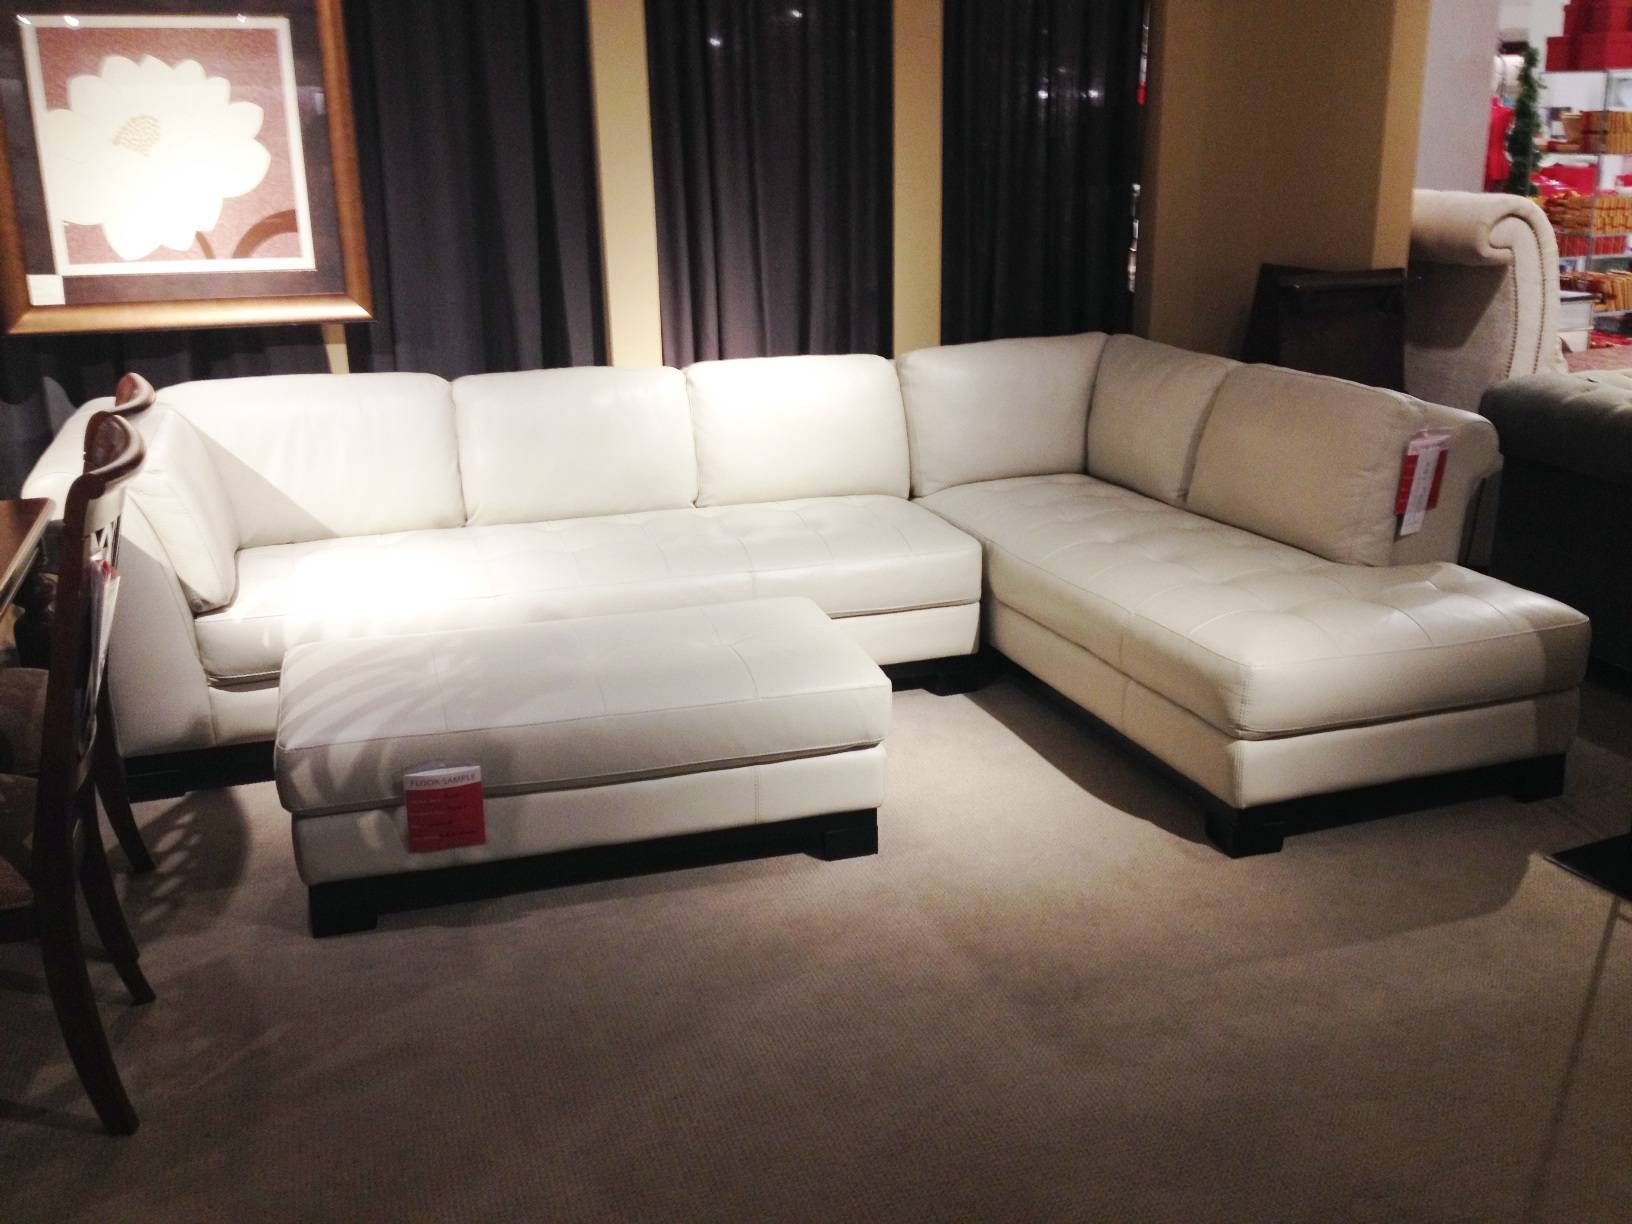 Furniture : Macys Leather Sectional Sofa Furniture Ideas White Regarding Macys Leather Sectional Sofa (View 1 of 25)